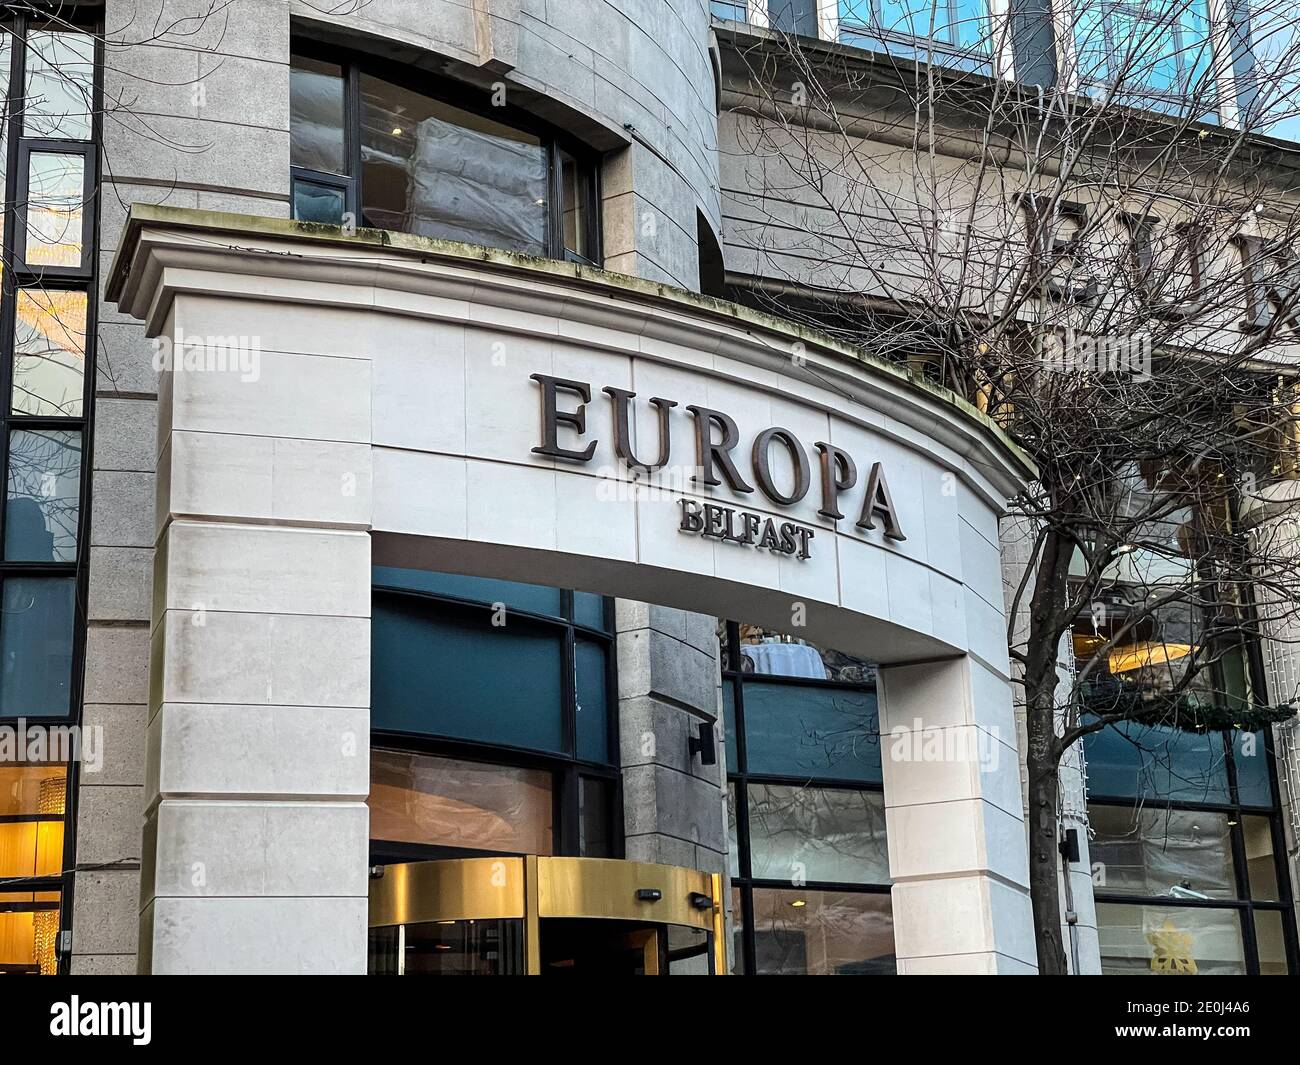 Belfast, Northern Ireland - Dec 19, 2020: The sign for the Europa Hotel in Belfast Stock Photo